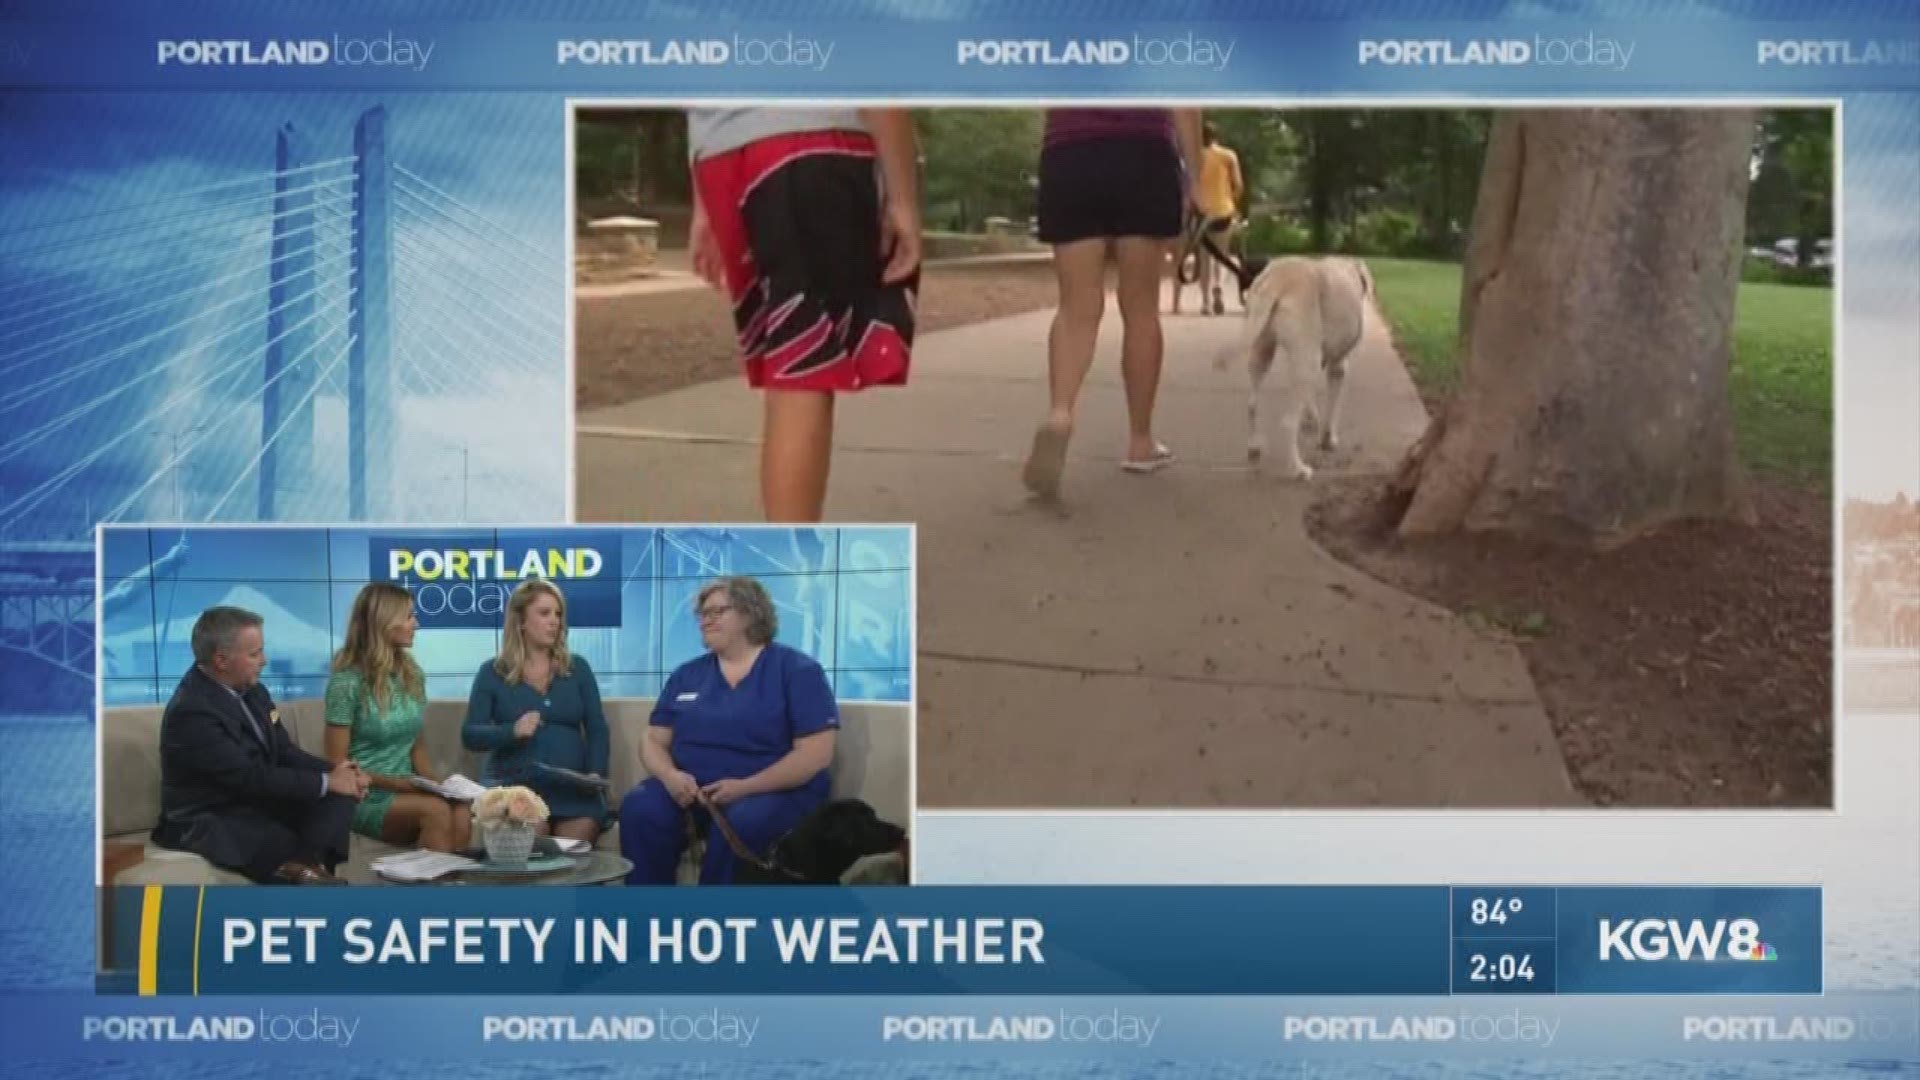 Pet safety in hot weather